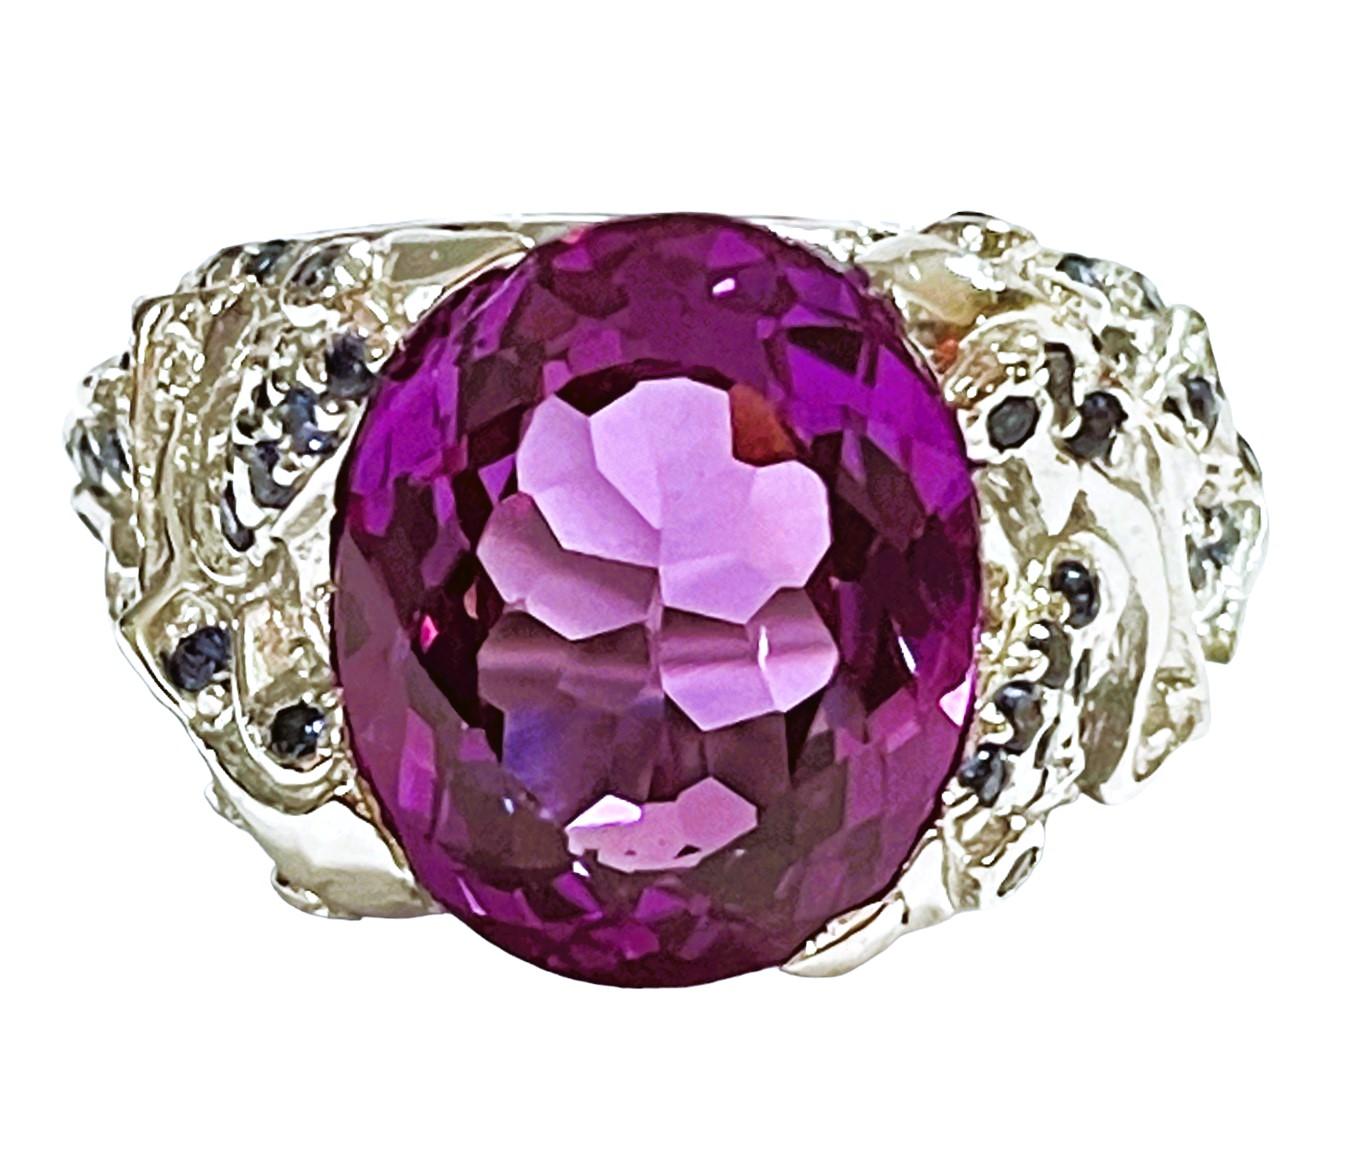 What beautiful colors in this ring!  The ring is a size 7.25.   It is a natural stone and was mined in Africa and is just exquisite. It is an authentic natural stone. It is a highly rated and the IF means 